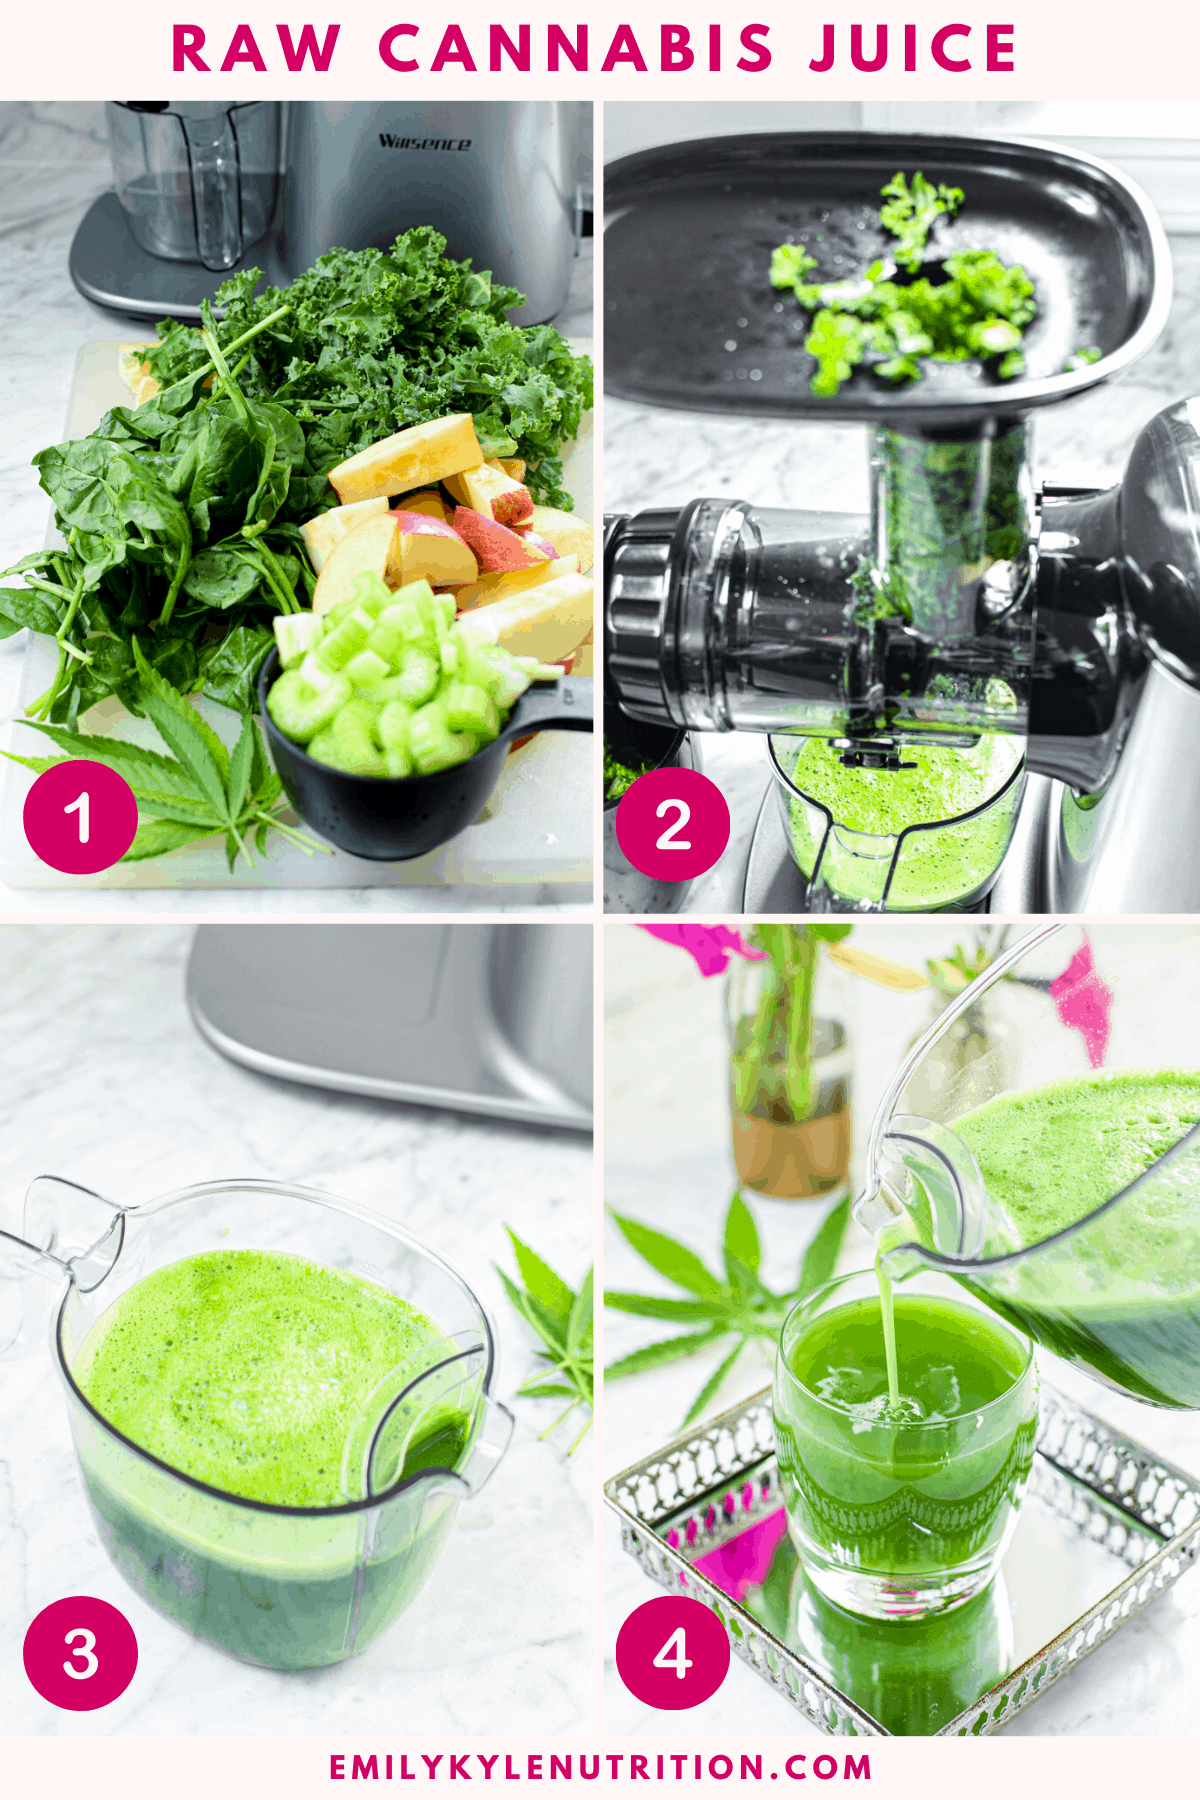 Step by step instructional guide with 4 photos showing the steps to making raw cannabis juice